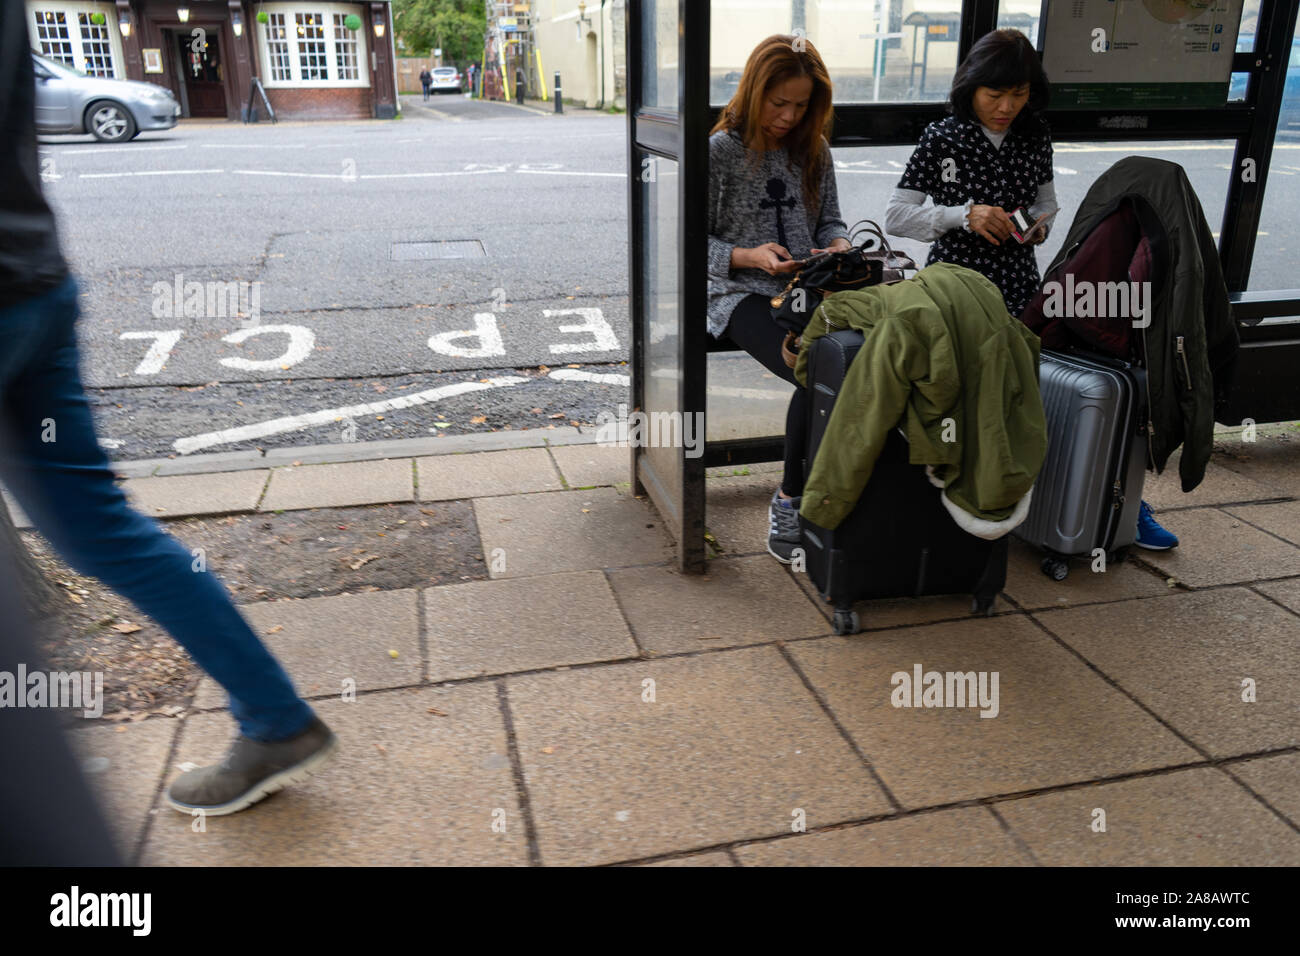 two asian women sitting at a bus stop with suitcases while people walk by Stock Photo